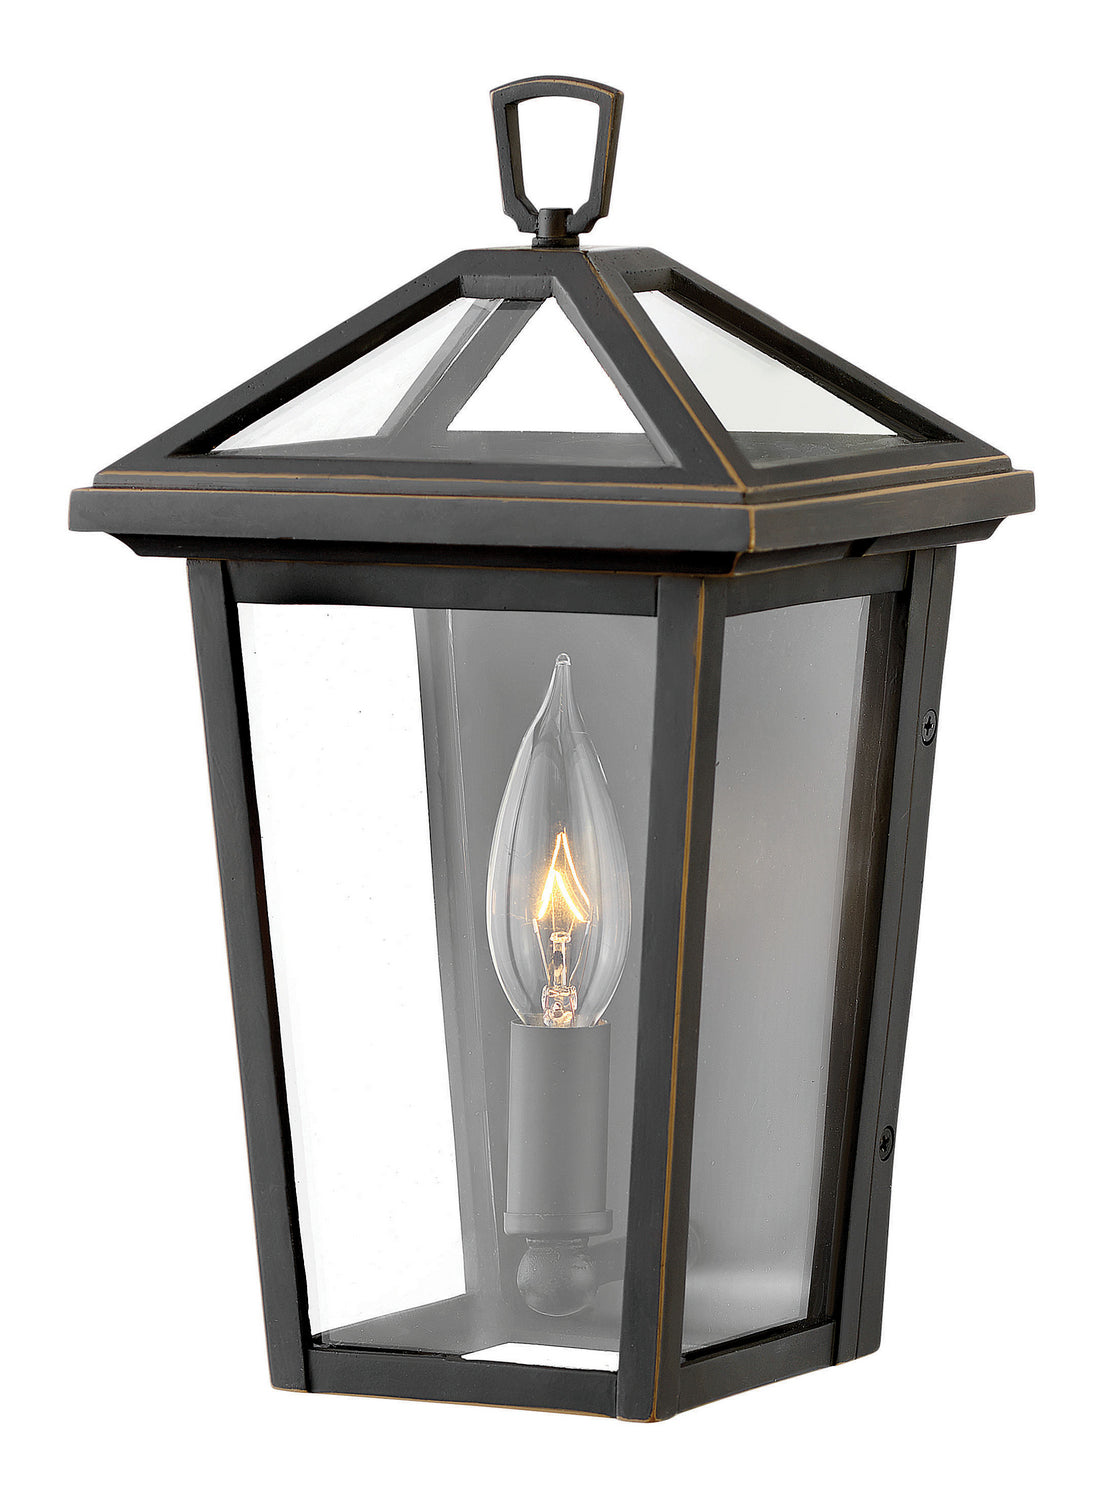 Hinkley - 2566OZ - LED Outdoor Lantern - Alford Place - Oil Rubbed Bronze